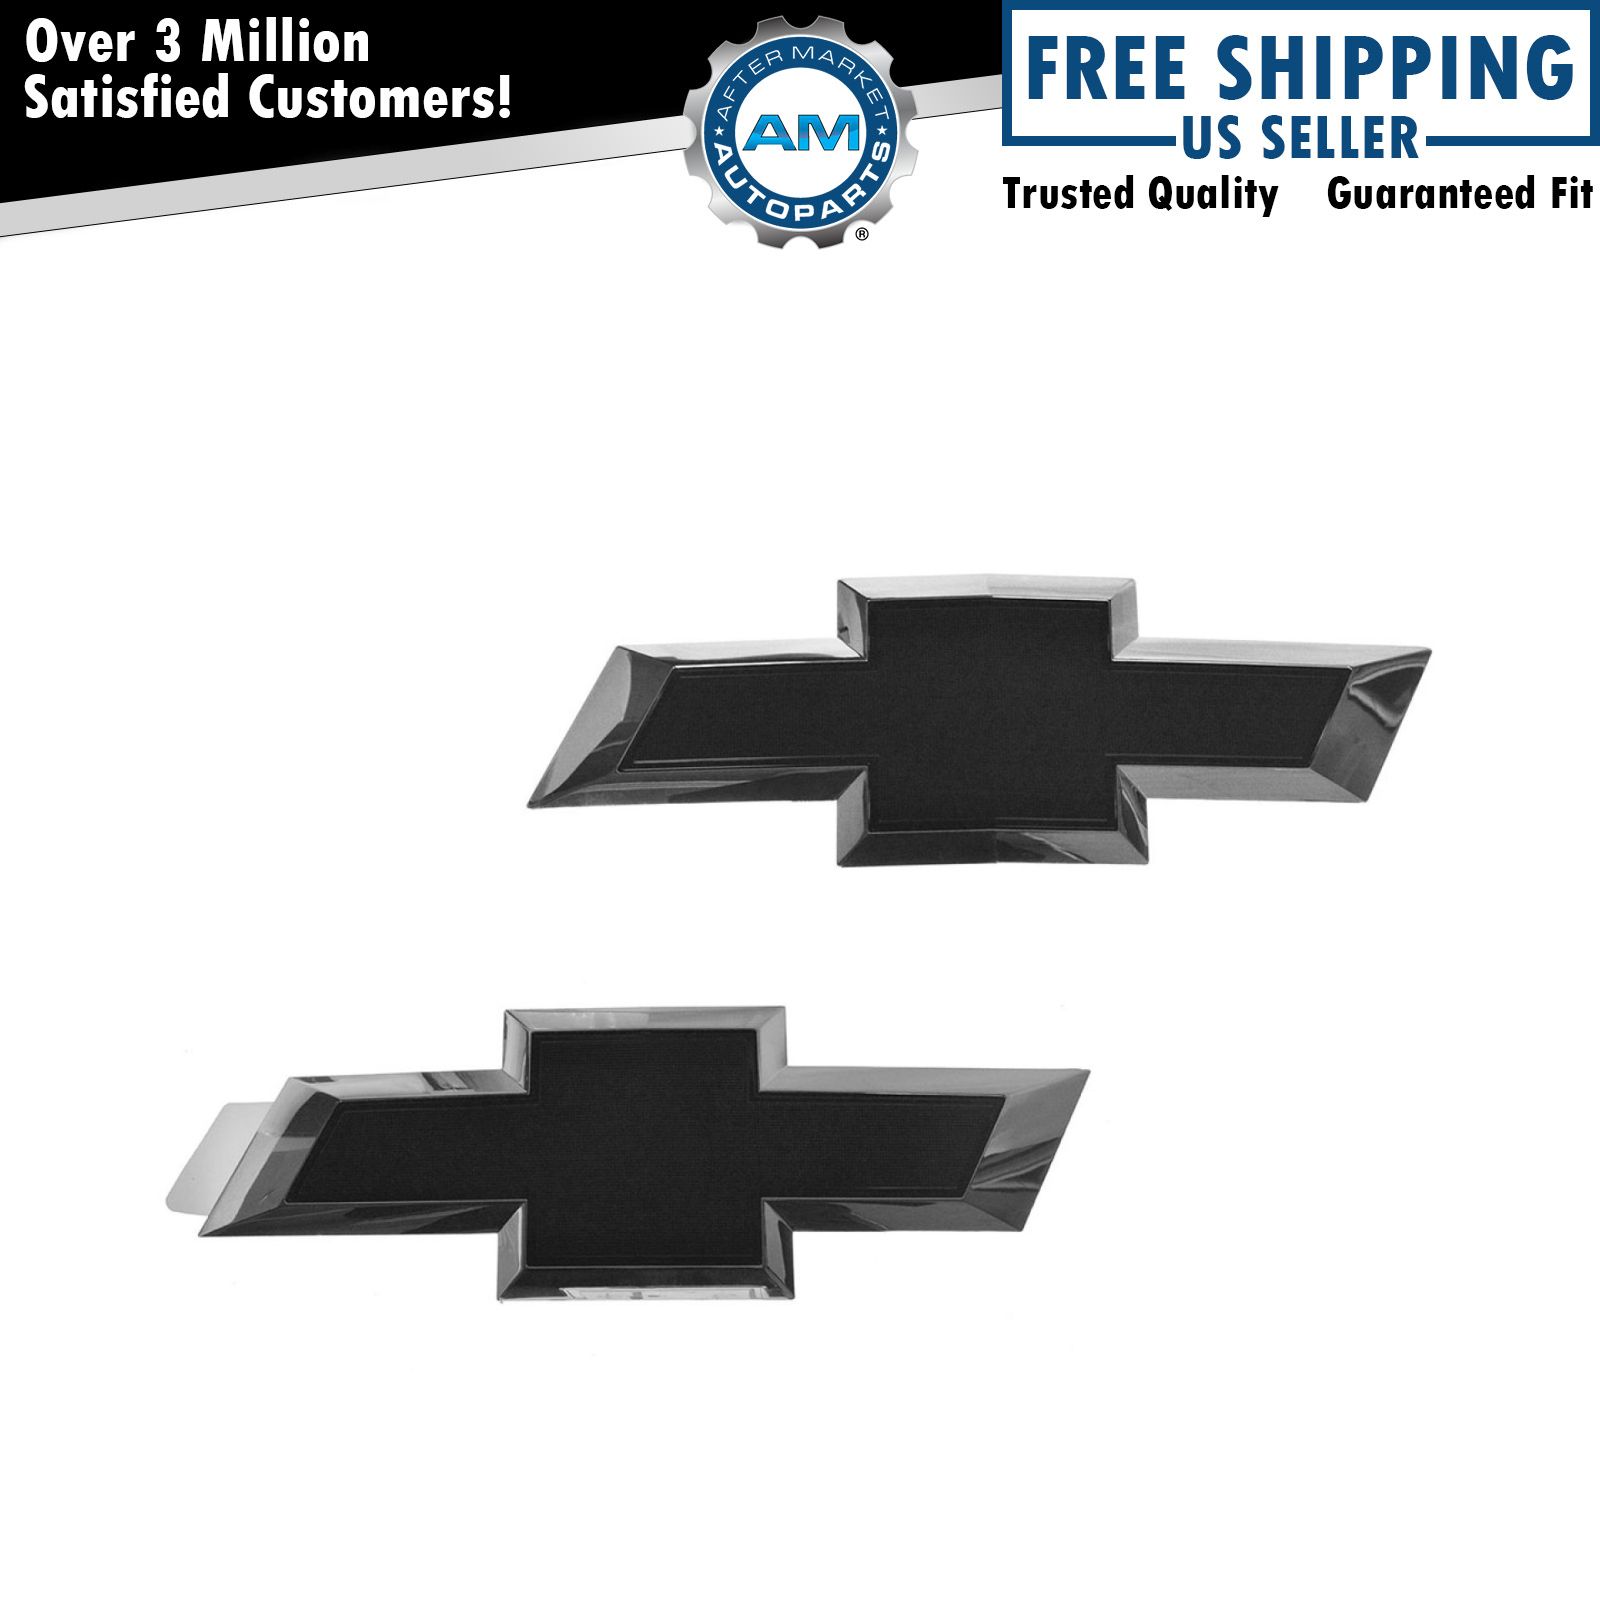 GM Tailgate & Grille Mounted Black Bow Tie Emblem Pair for 14-17 Chevy